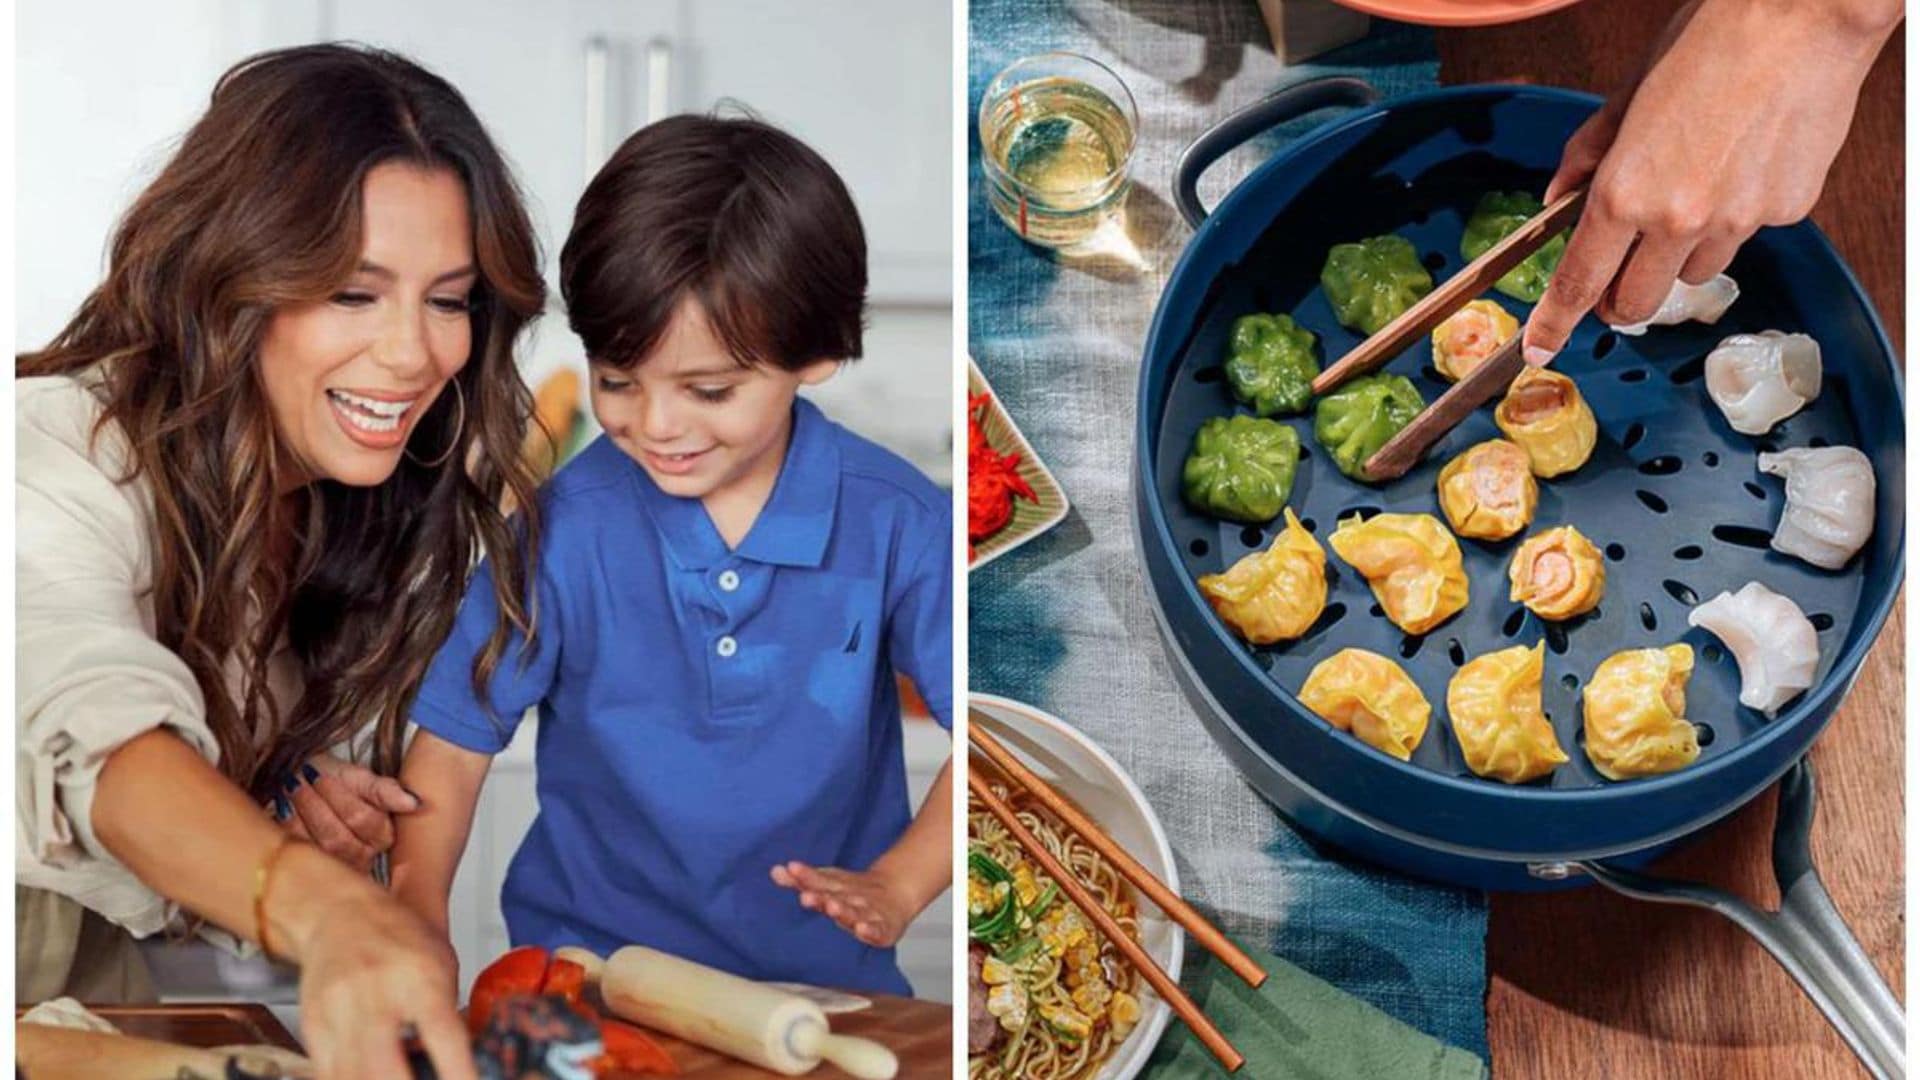 Eva Longoria honors her roots and memories in the kitchen with a new high-performing cookware collection